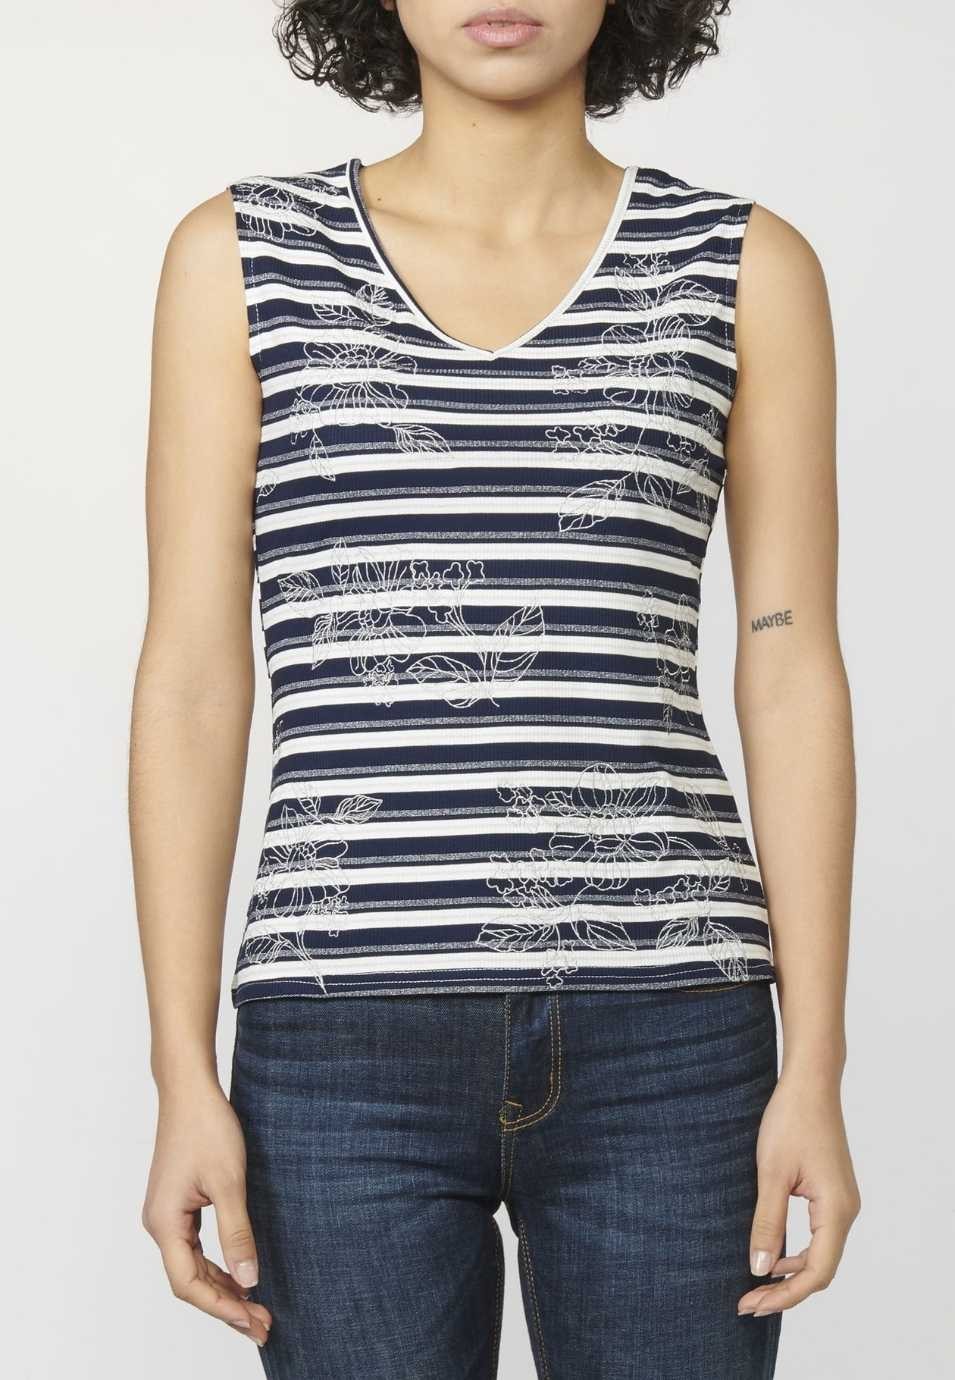 Women's Sailor-style V-Neck Tank Top with Embroidery on the Front 4